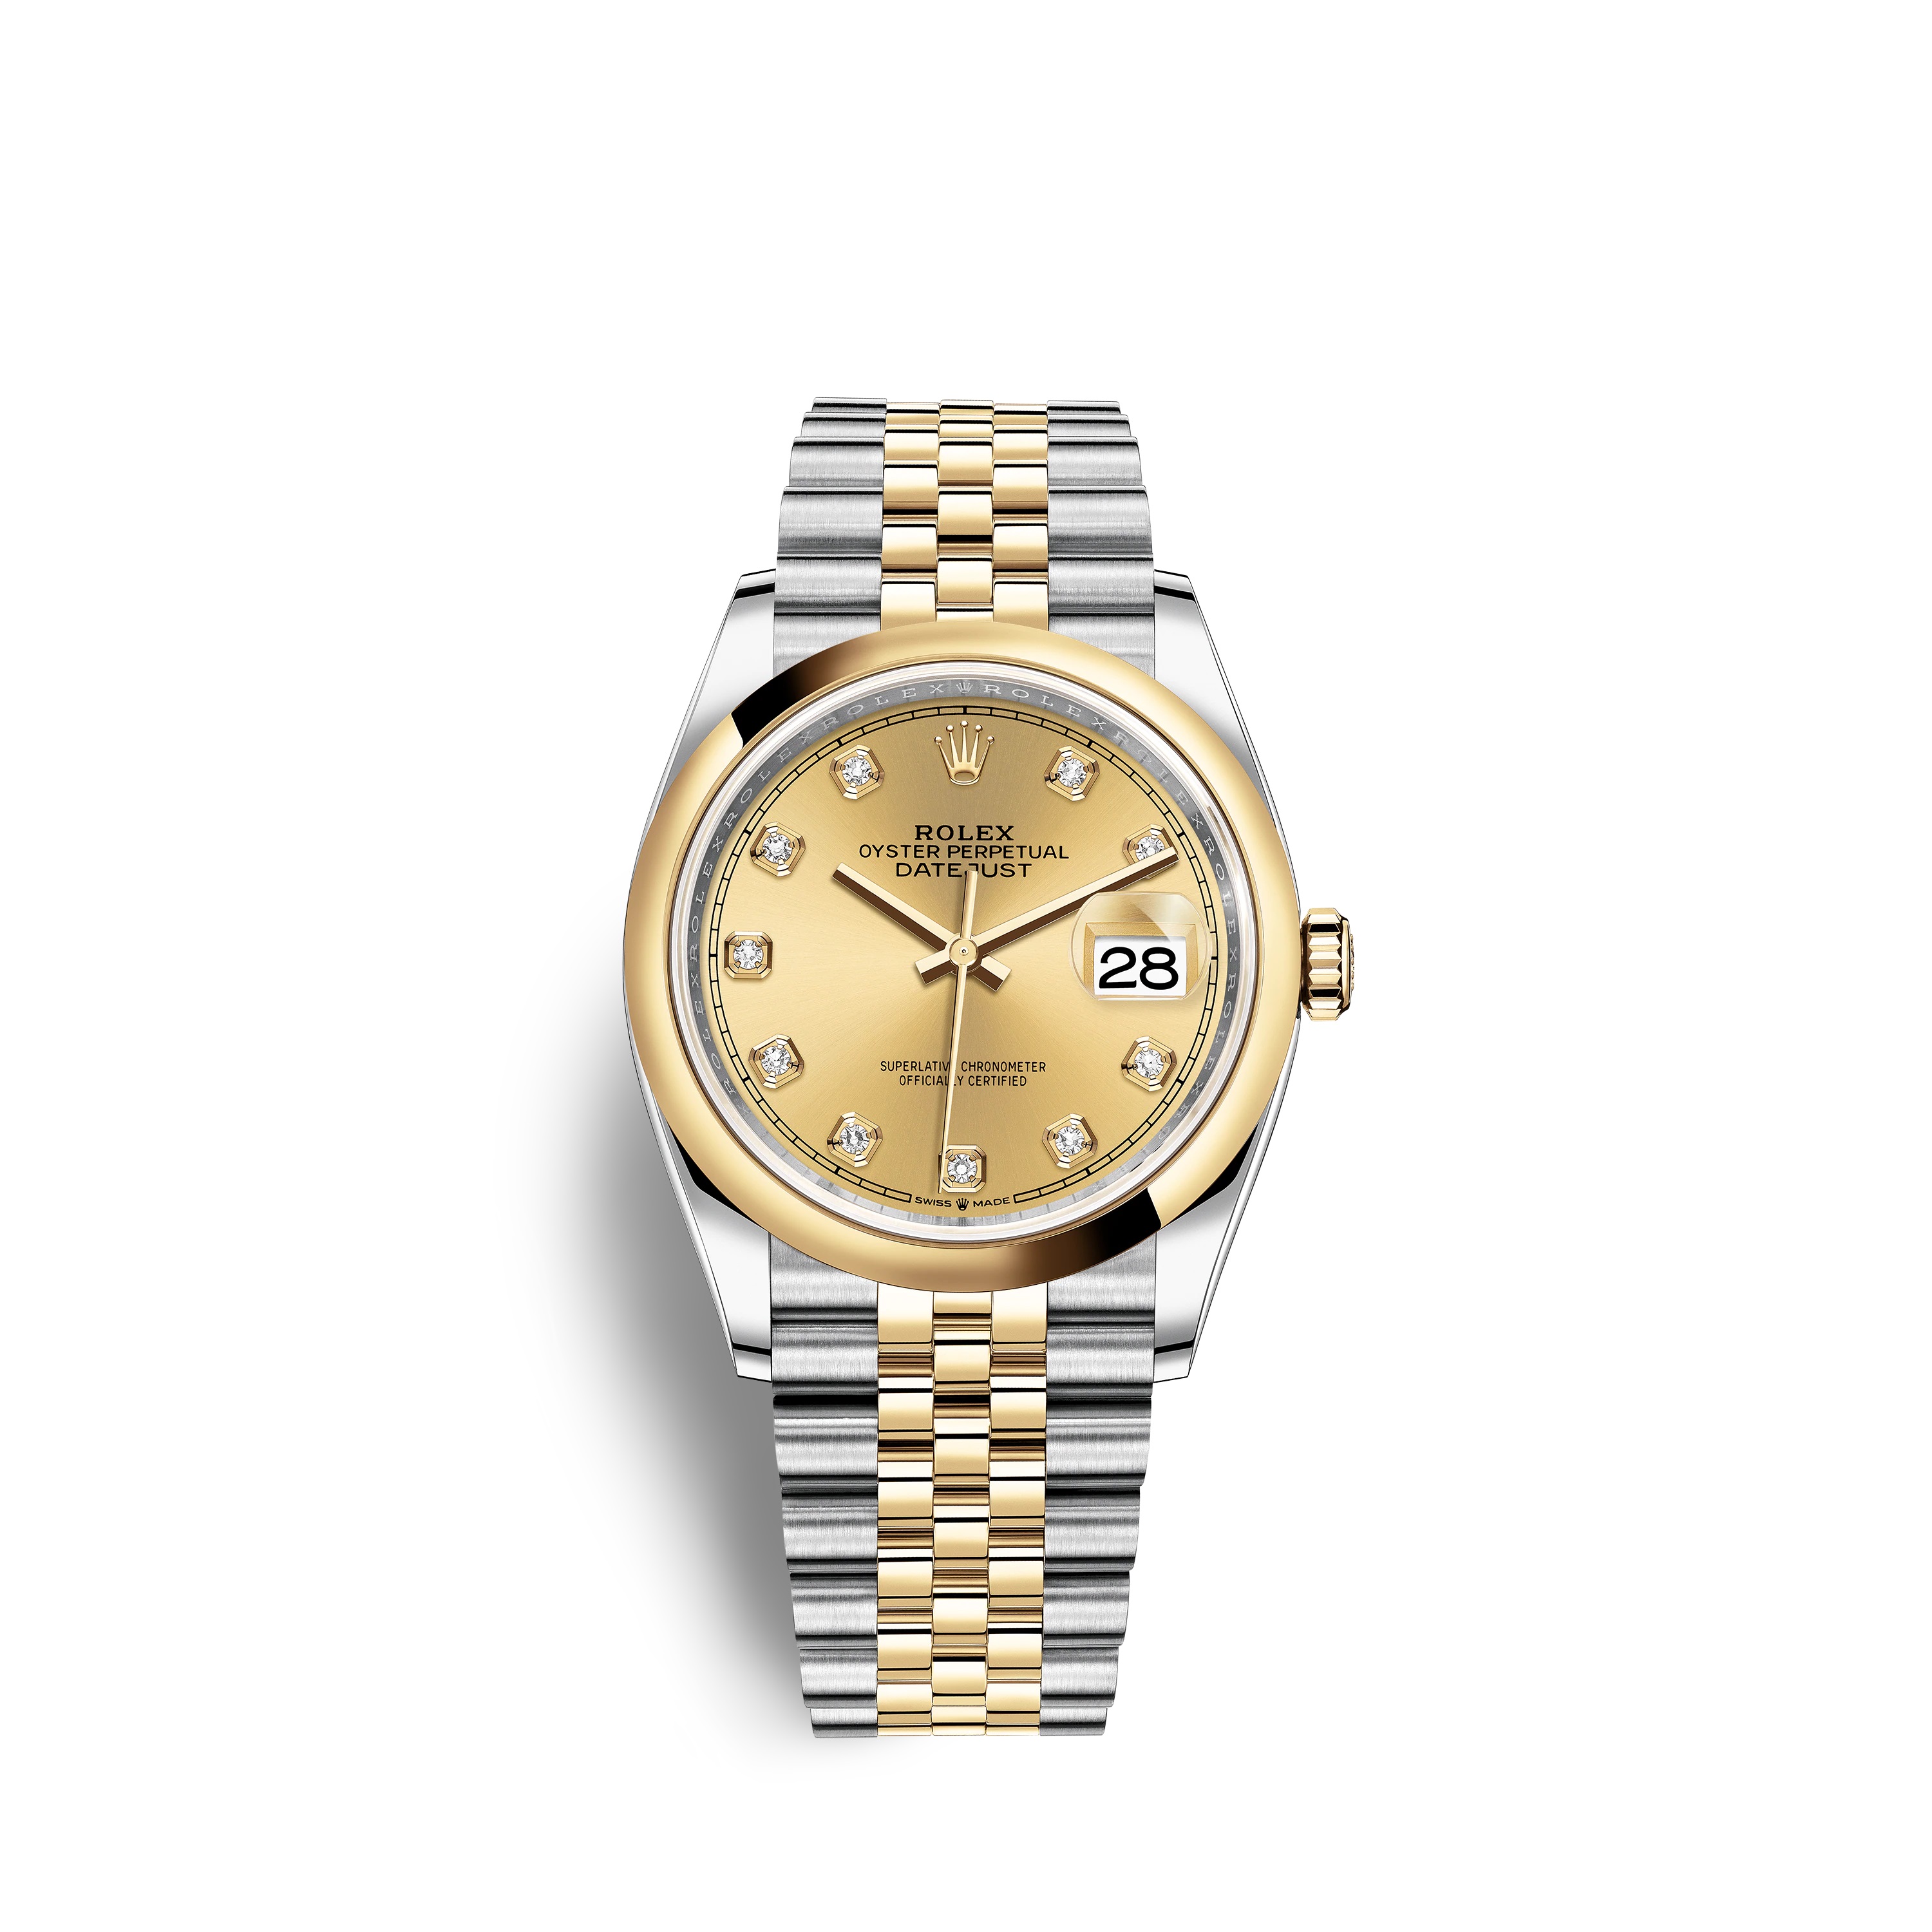 Datejust 36 126203 Gold & Stainless Steel Watch (Champagne-Colour Set with Diamonds)